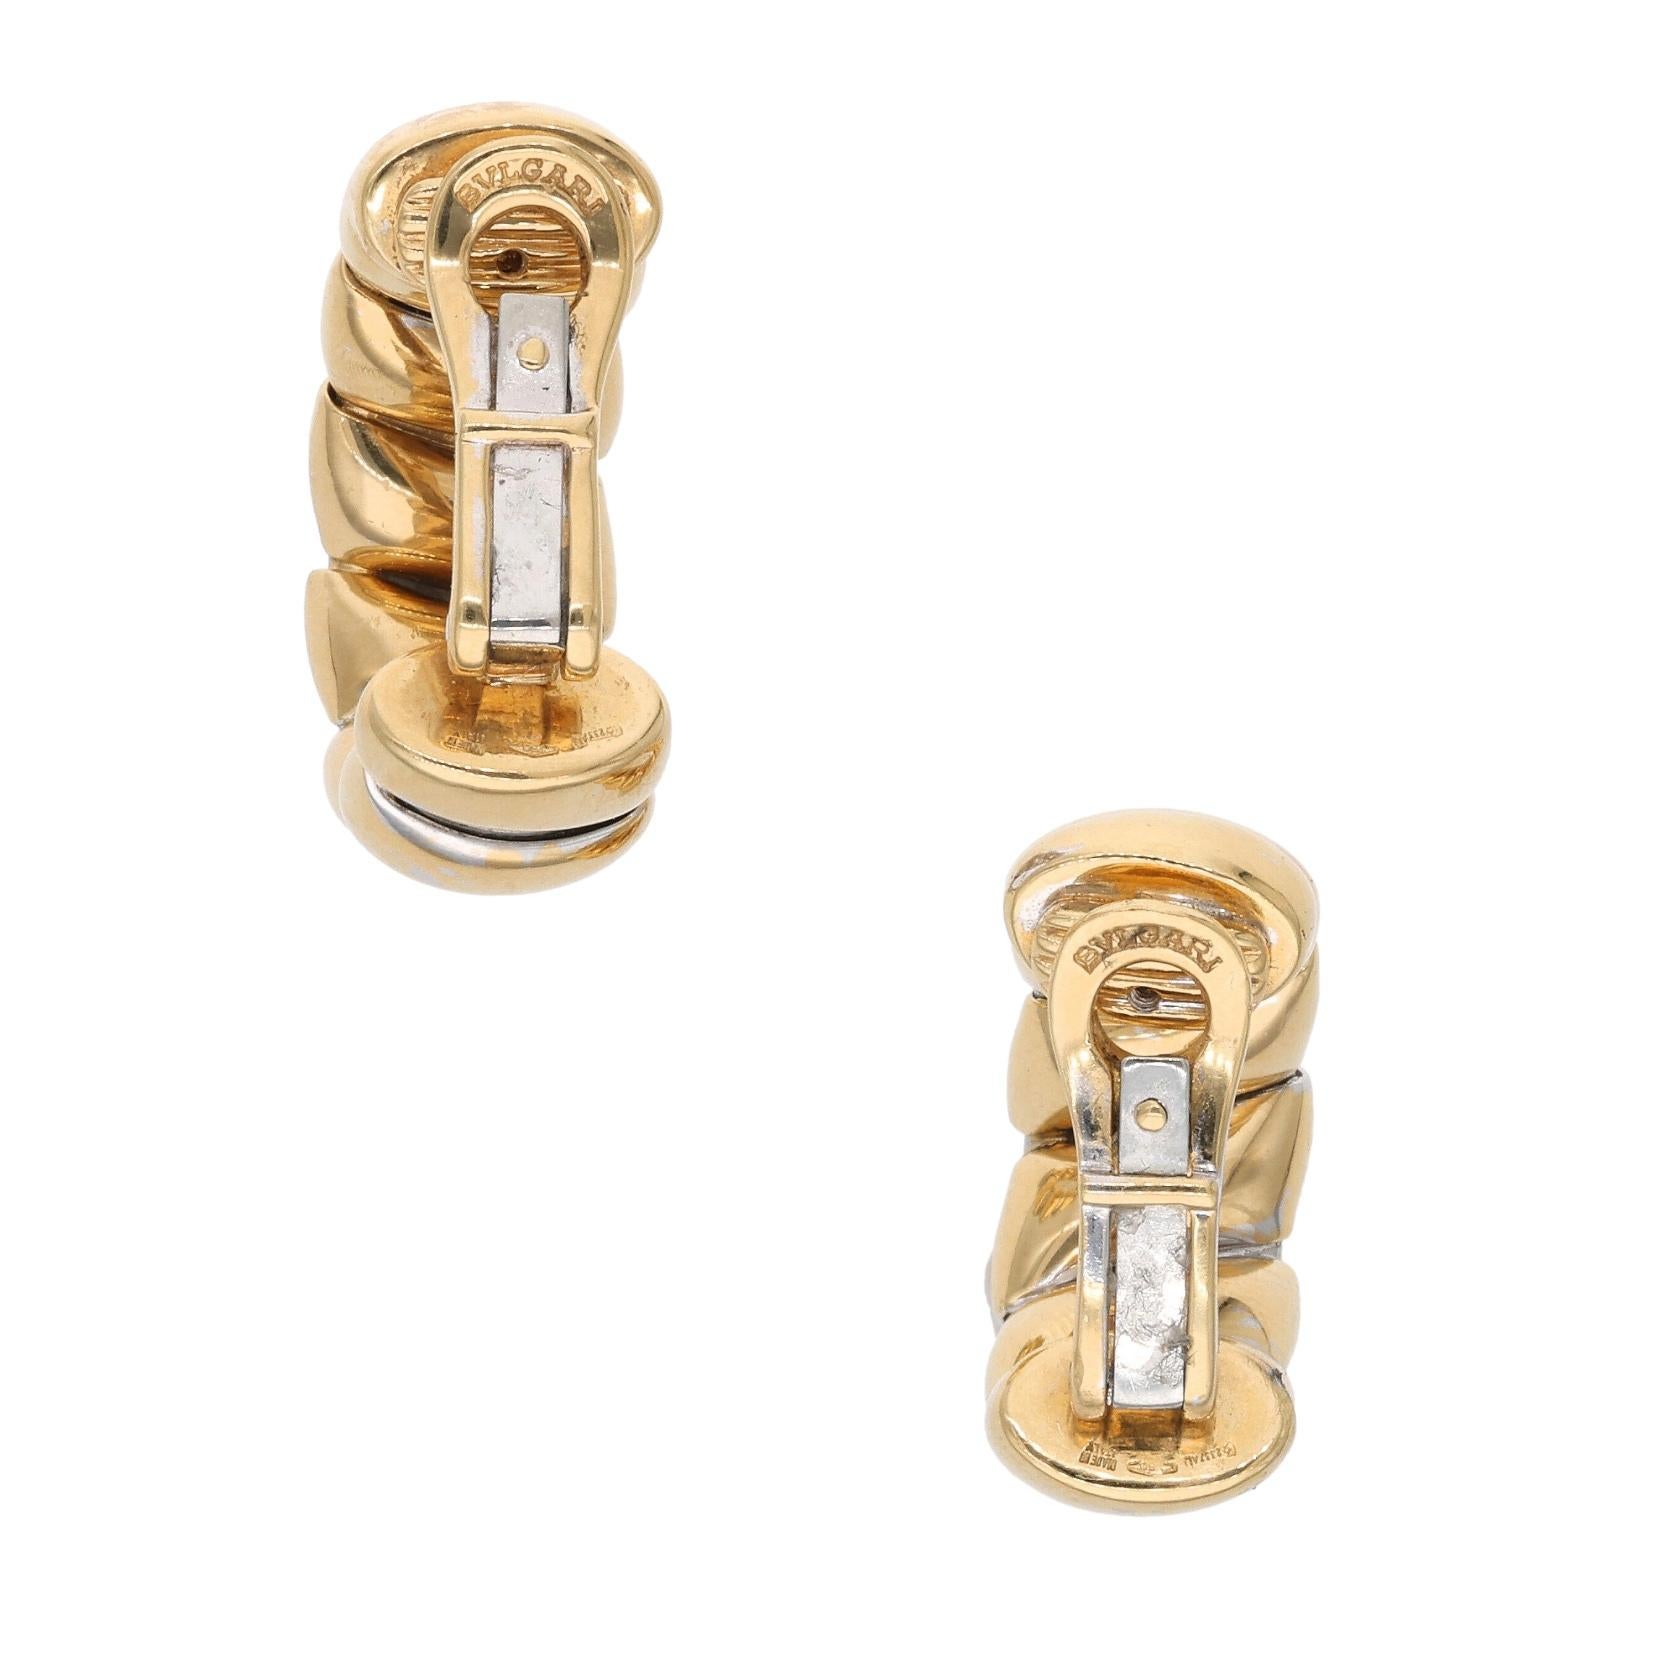 Composed of white gold and gold sections

- 18 karat yellow and white gold
- Signed Bvlgari
- Total weight 29.0 grams
- Length 1 inch

The condition report is Good. 